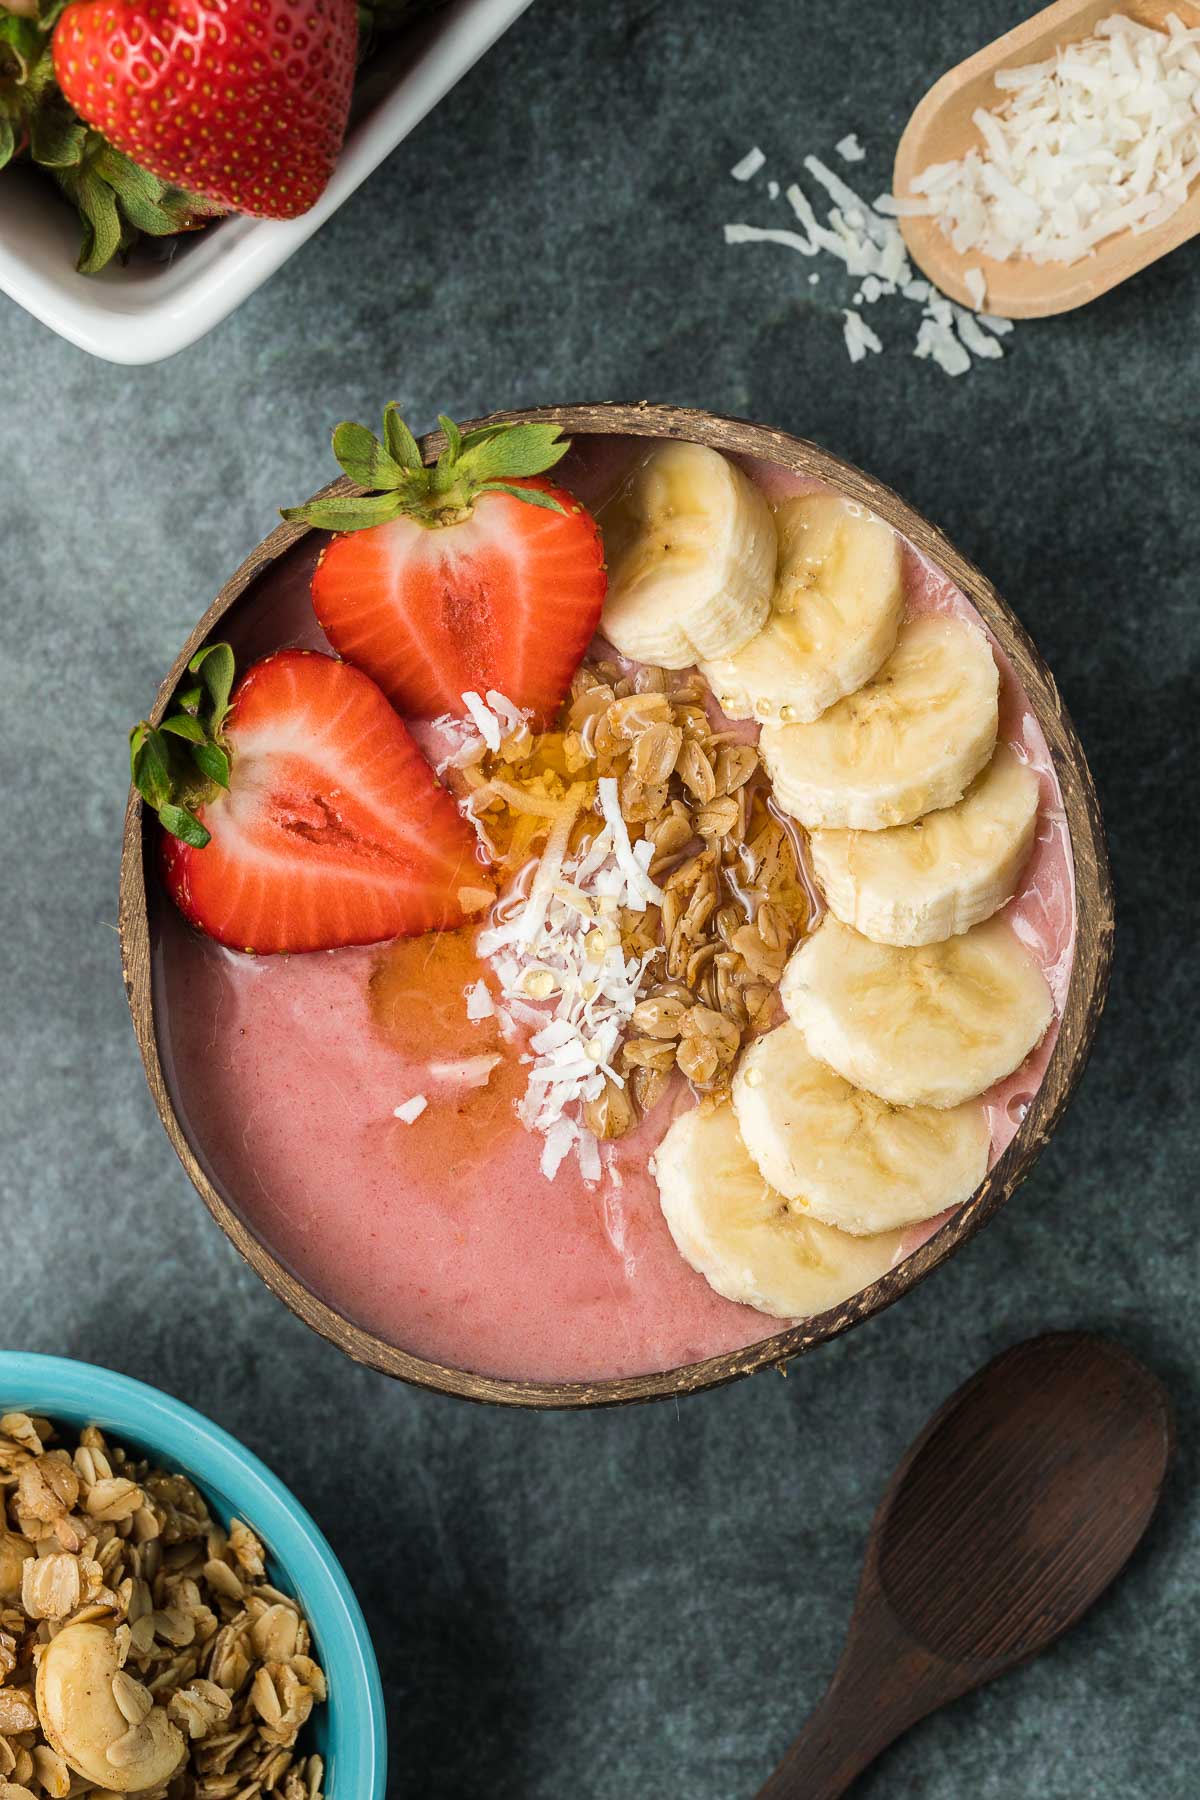 Strawberry banana smoothie bowl with bowl of granola and coconut flakes